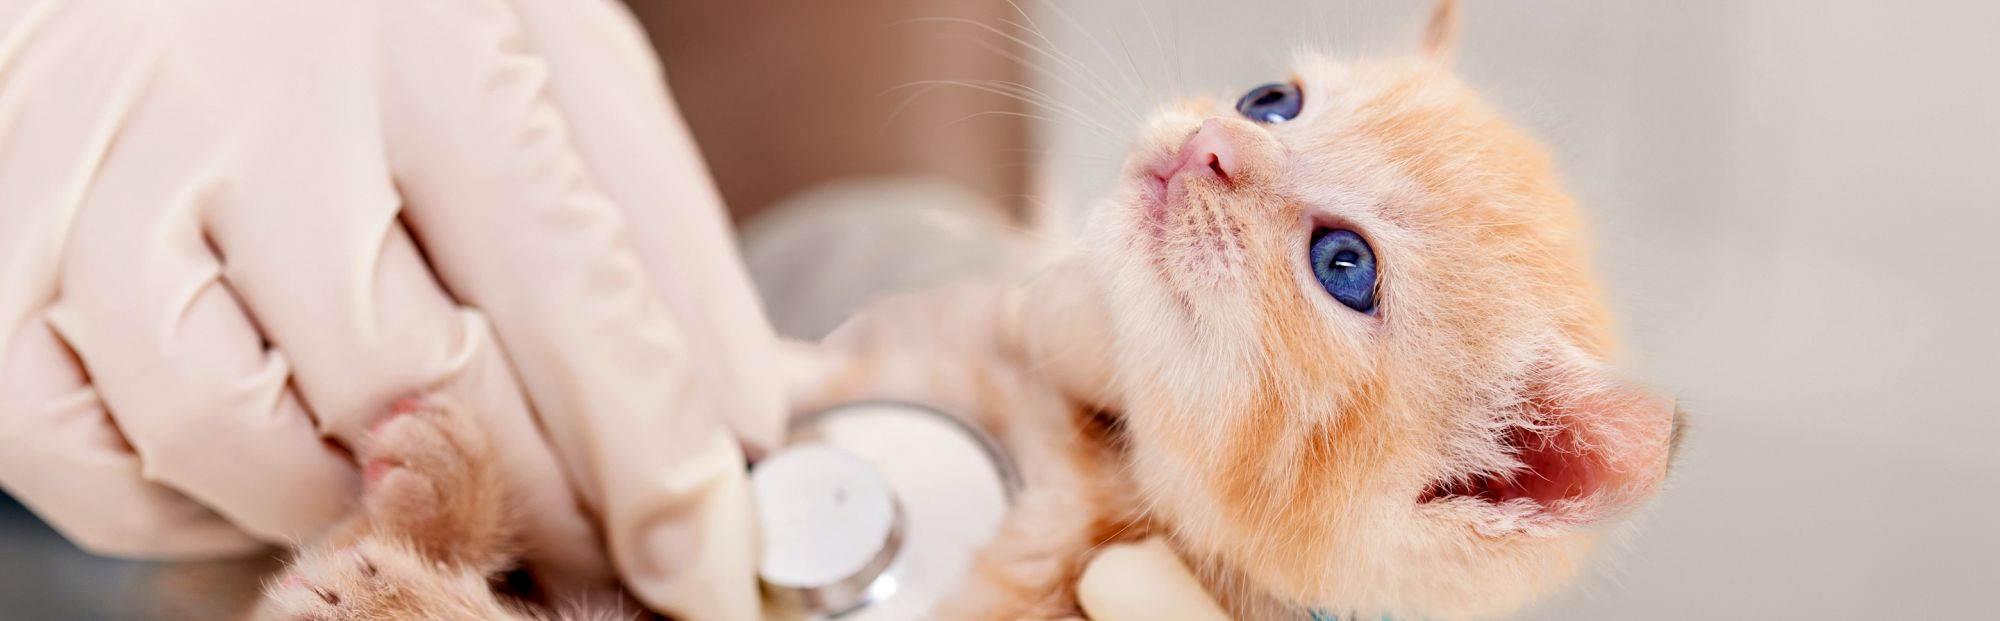 Ginger Kitten Being Examined by a Vet